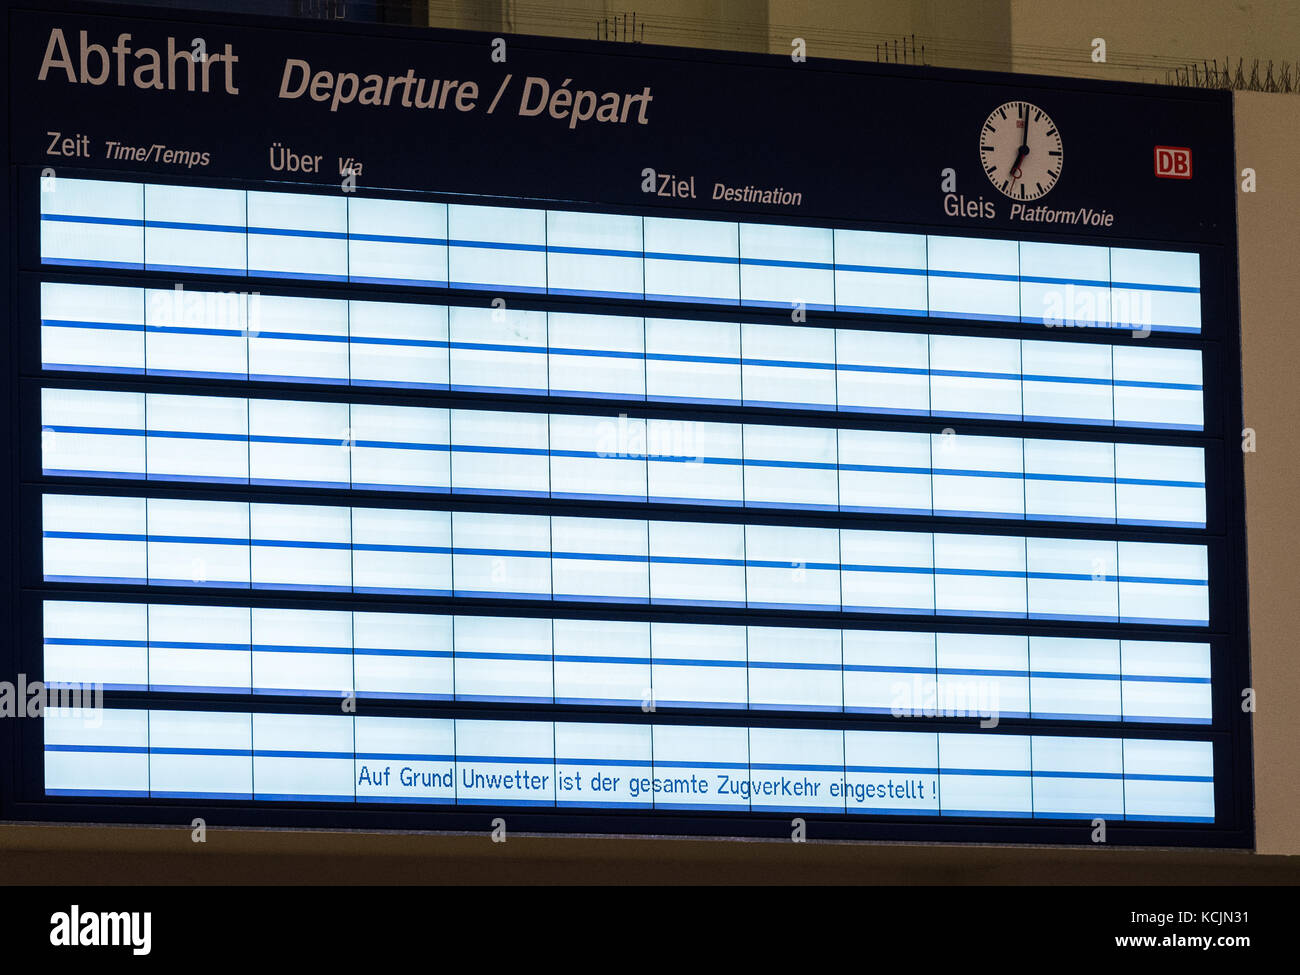 Hanover, Germany. 5th Oct, 2017. 'Auf Grund Unwetter ist der gesamte Zugverkehr eingestellt!' (lit. 'Due to a storm, the entire rail traffic is suspende!') is displayed on a board at the central station in Hanover, Germany, 5 October 2017. Storm Xavier caused the entire rail traffic at the central station of Hanover to stop. Numerous travellers are stuck now. Credit: Silas Stein/dpa/Alamy Live News Stock Photo